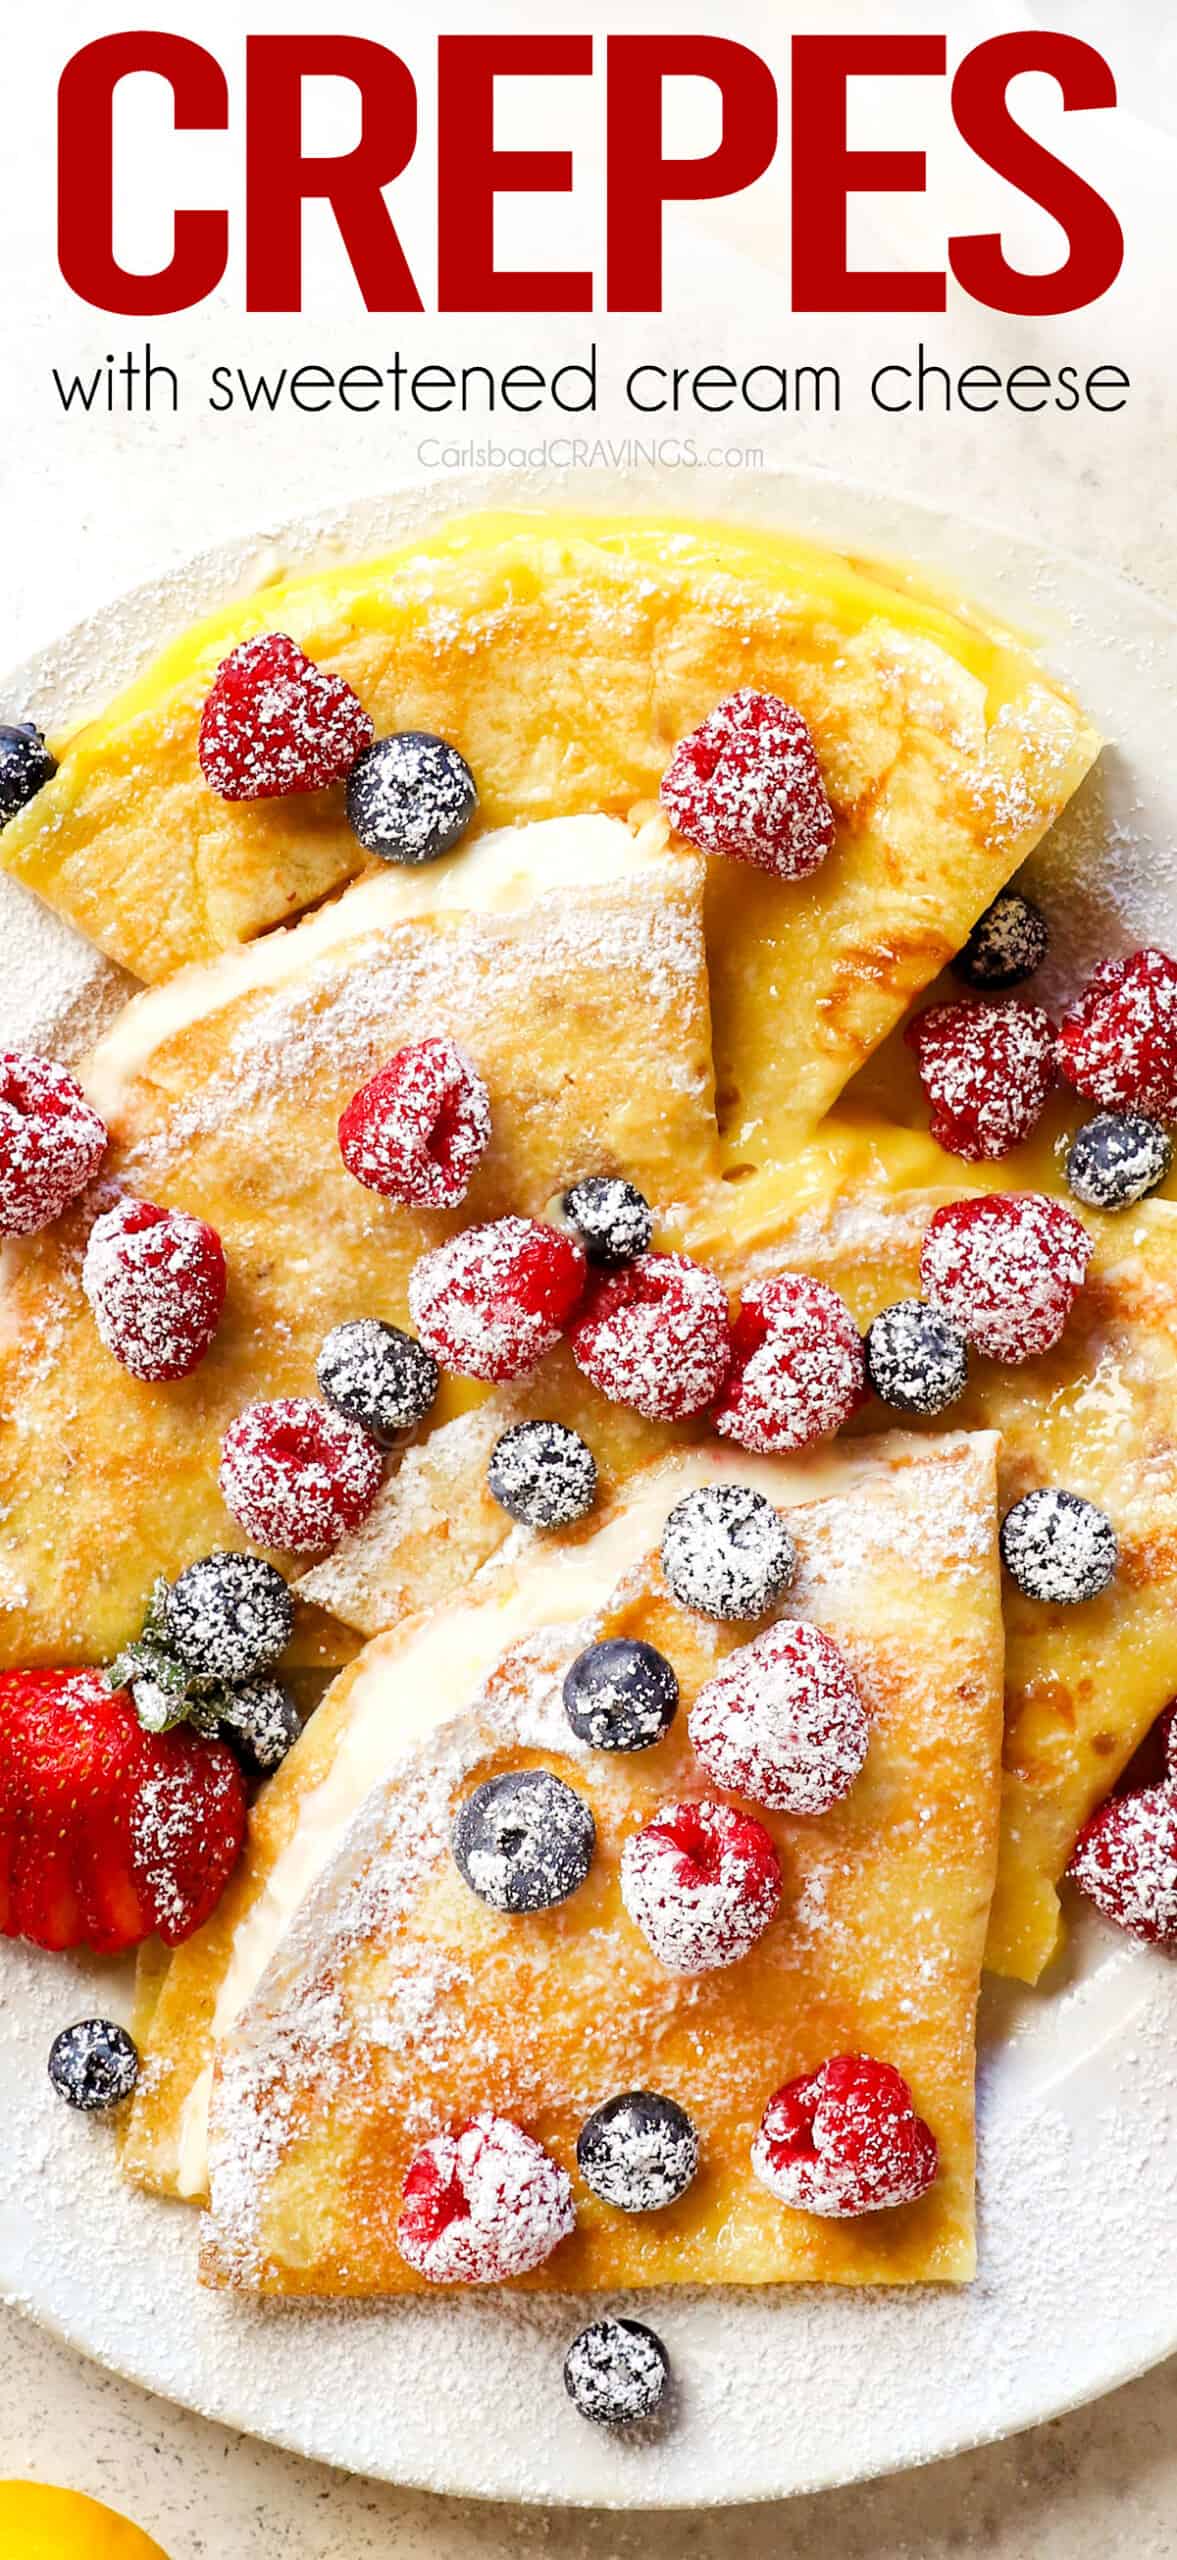 how to make crepes by serving with powdered sugar and berries